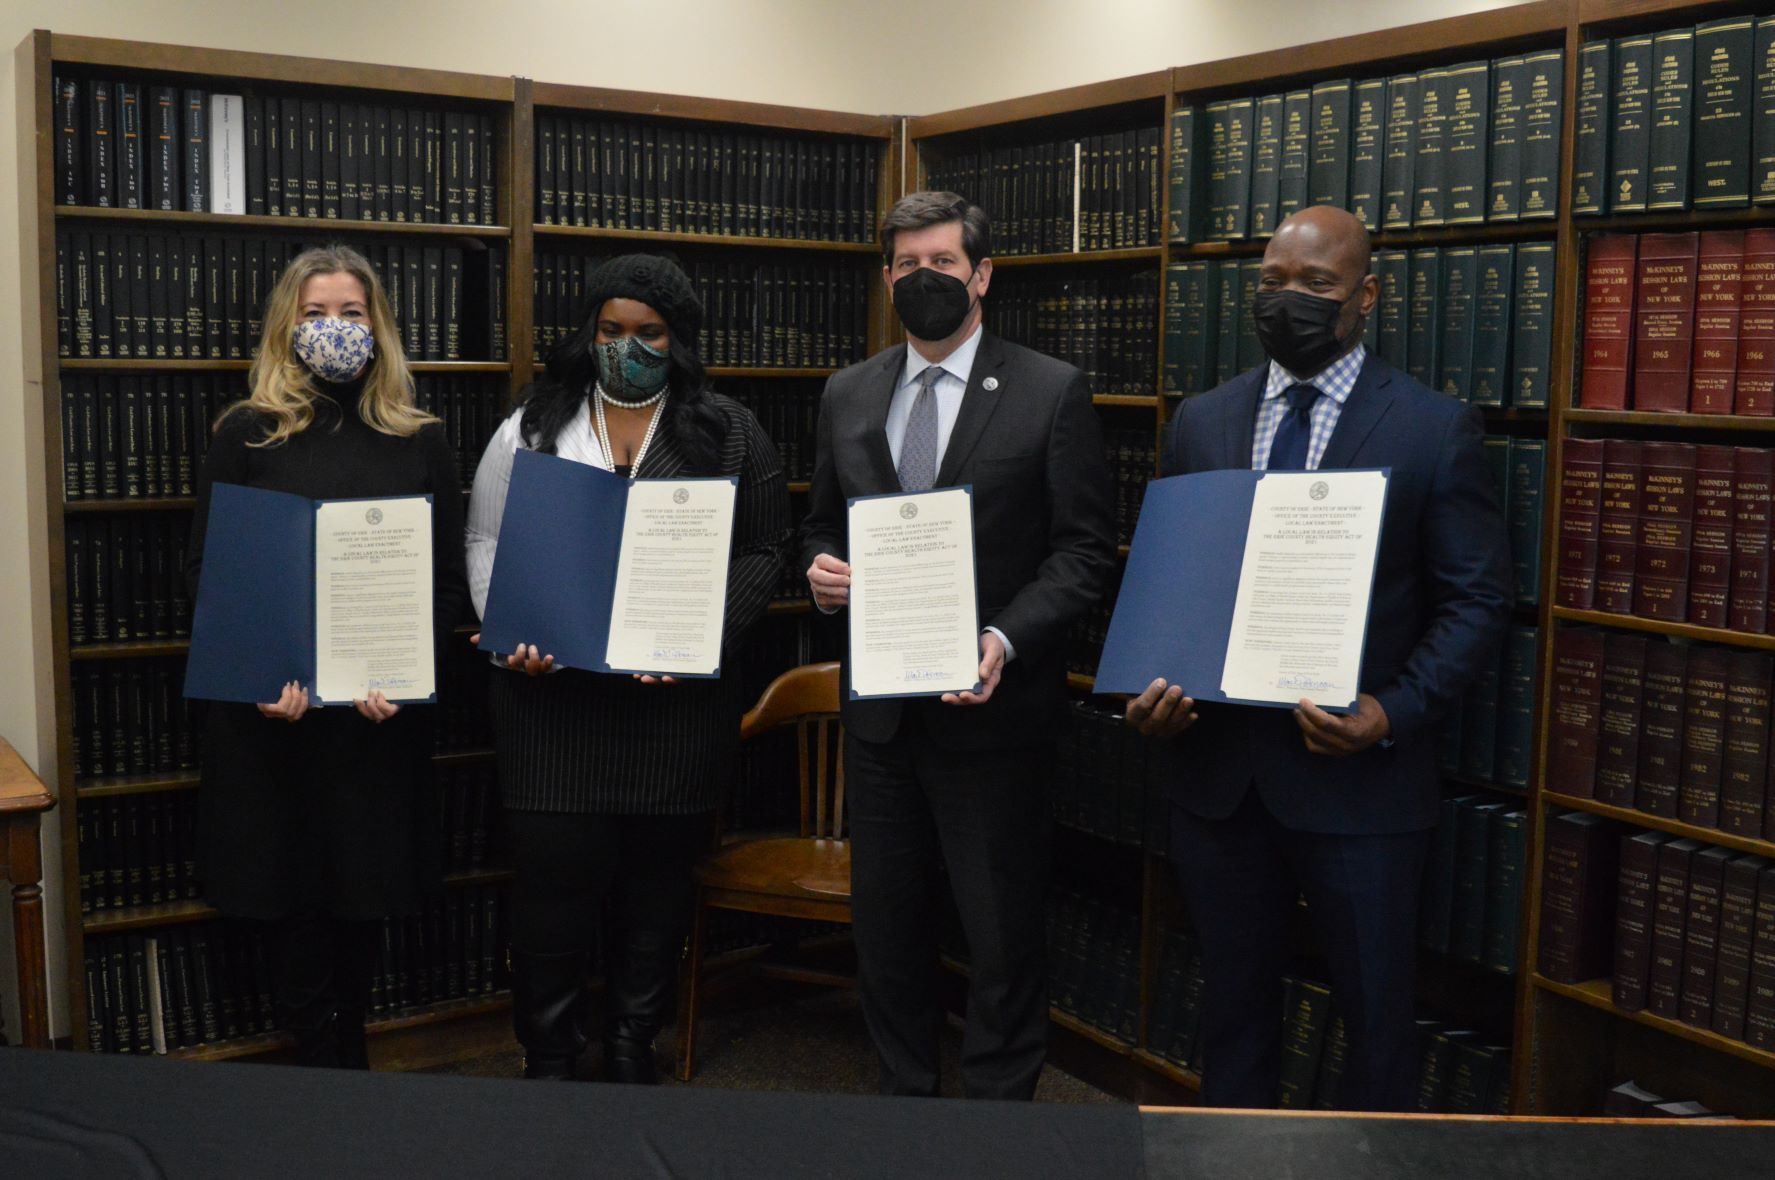 From left: Erie County Legislator Lisa Chimera, Legislature Chairwoman April N.M. Baskin, Erie County Executive Mark Poloncarz, and Legislator Howard Johnson hold copies of the newly signed Local Law Intro. No. 3-1 (2021) establishing an office of health equity within the Erie County Department of Health. (Submitted photo)